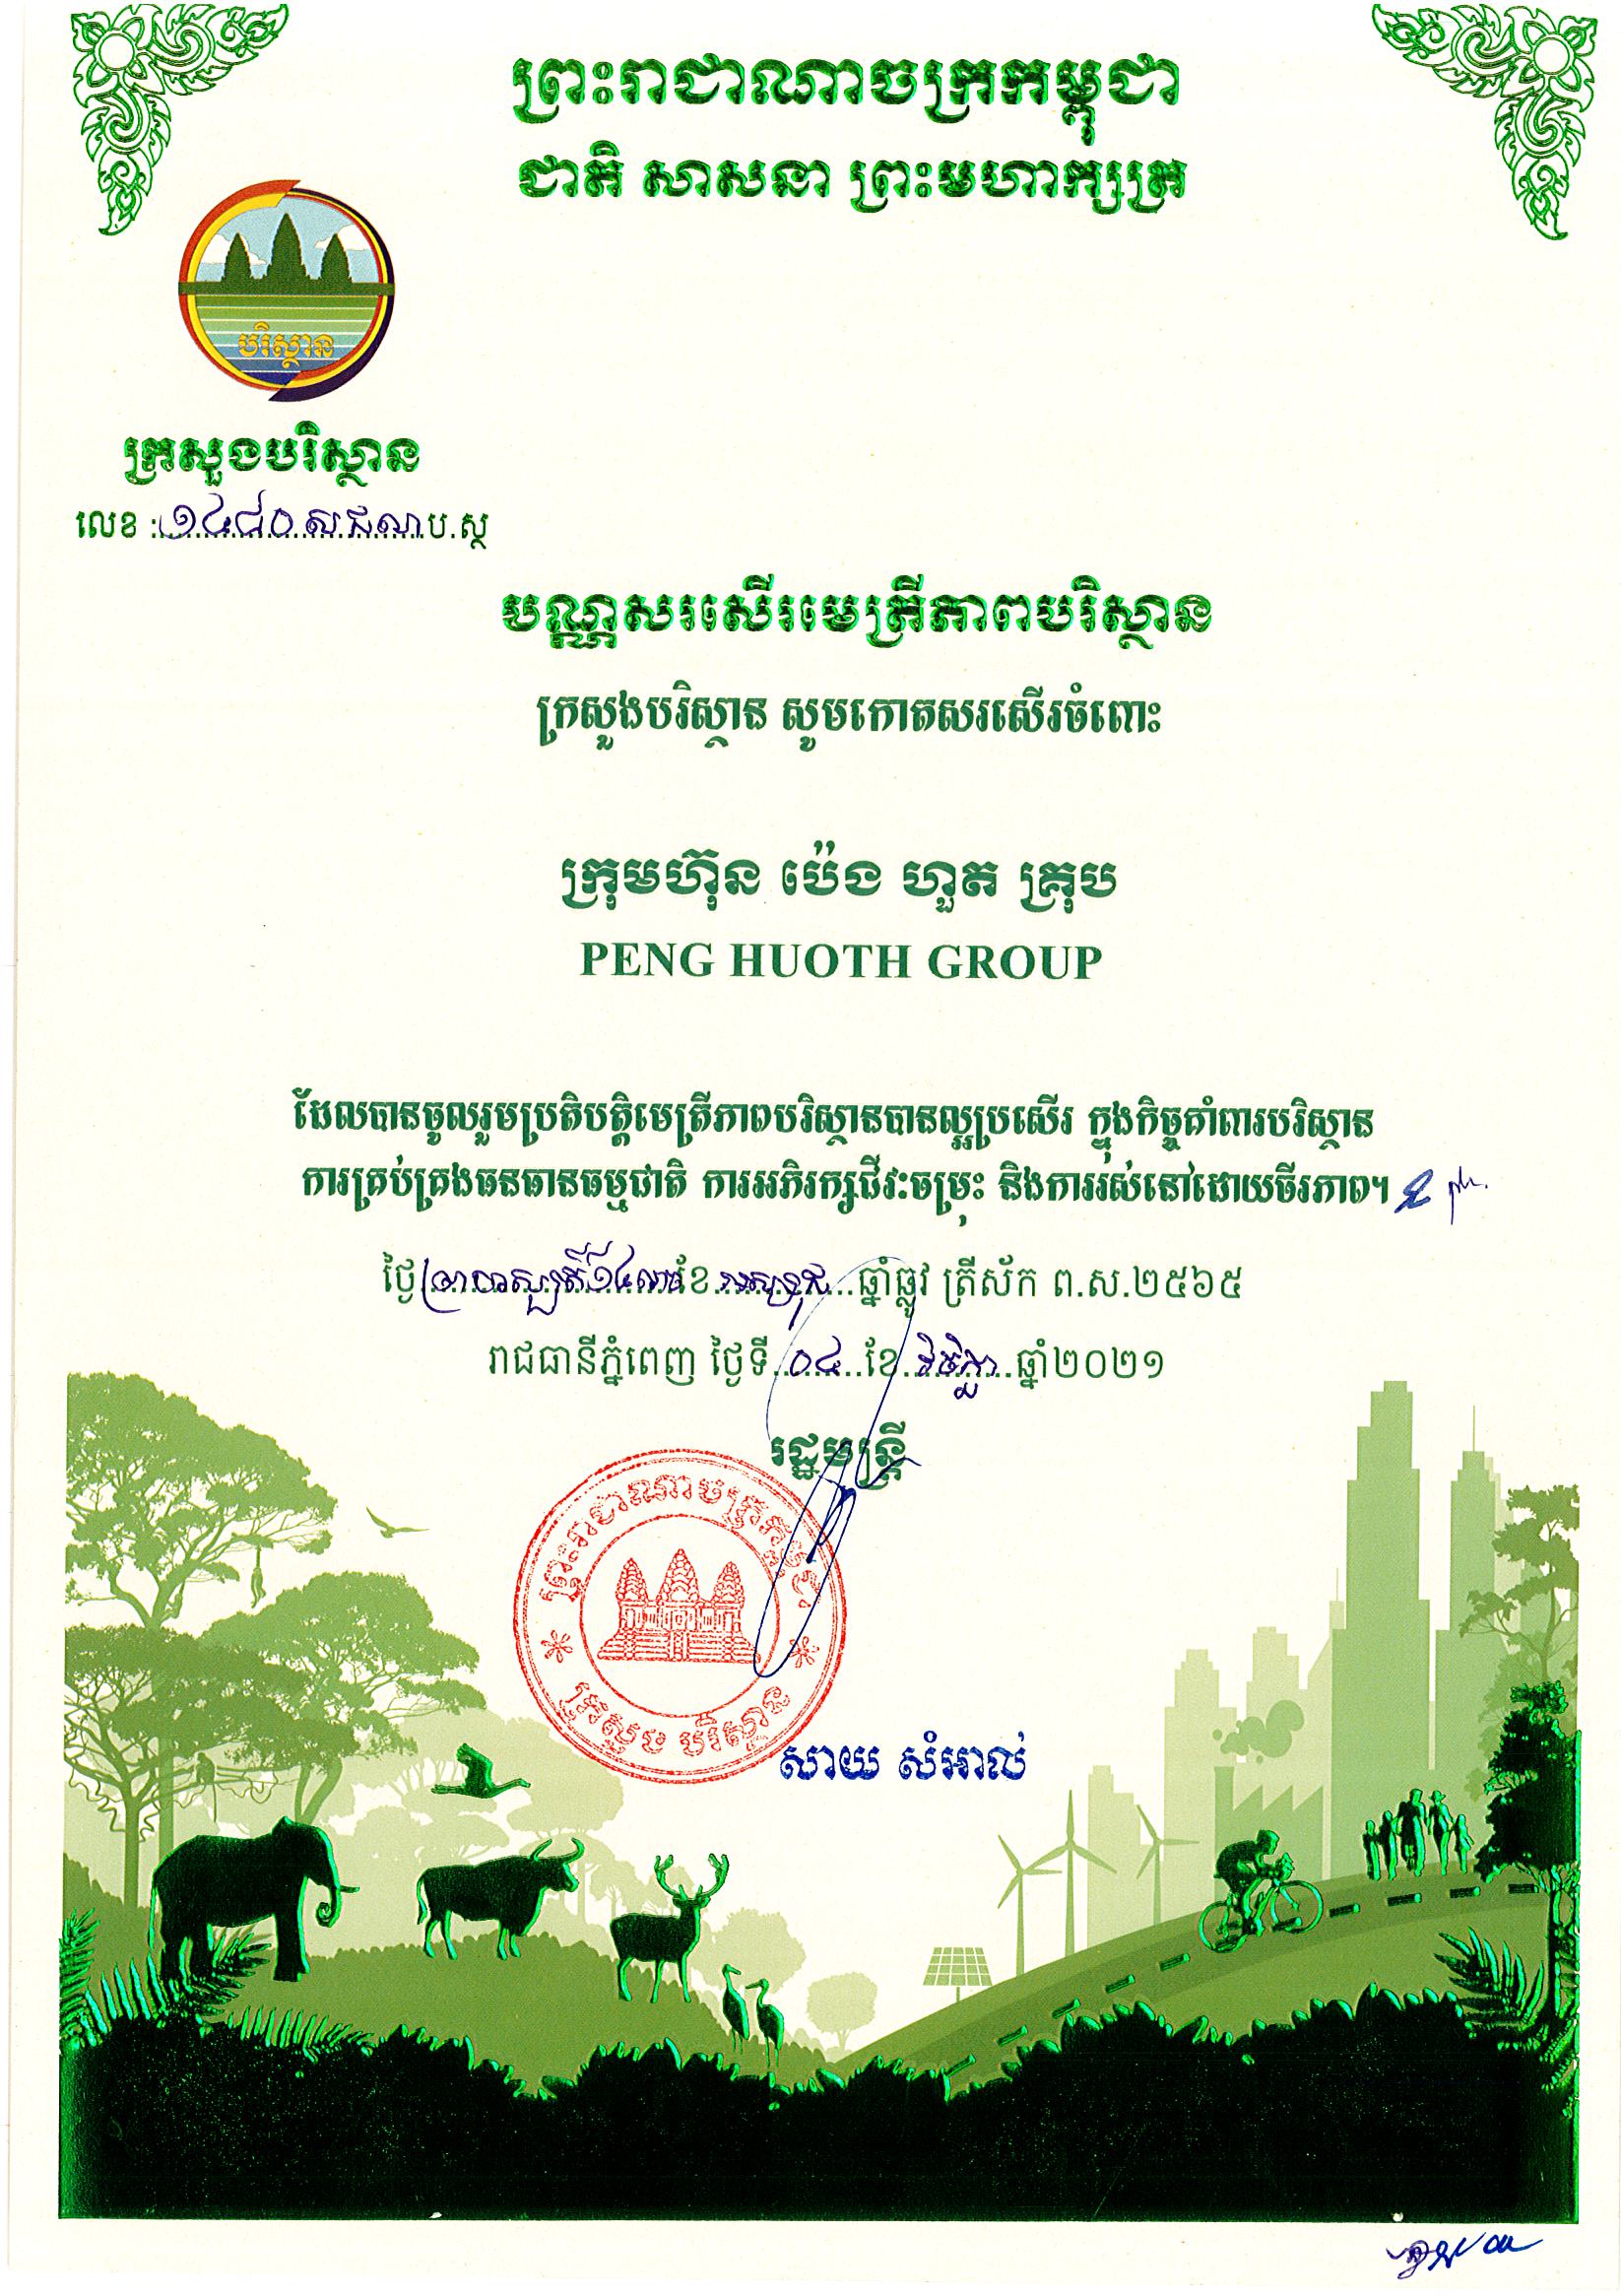 Special recognition from Ministry of Environment for actively implementing environment- friendly activities